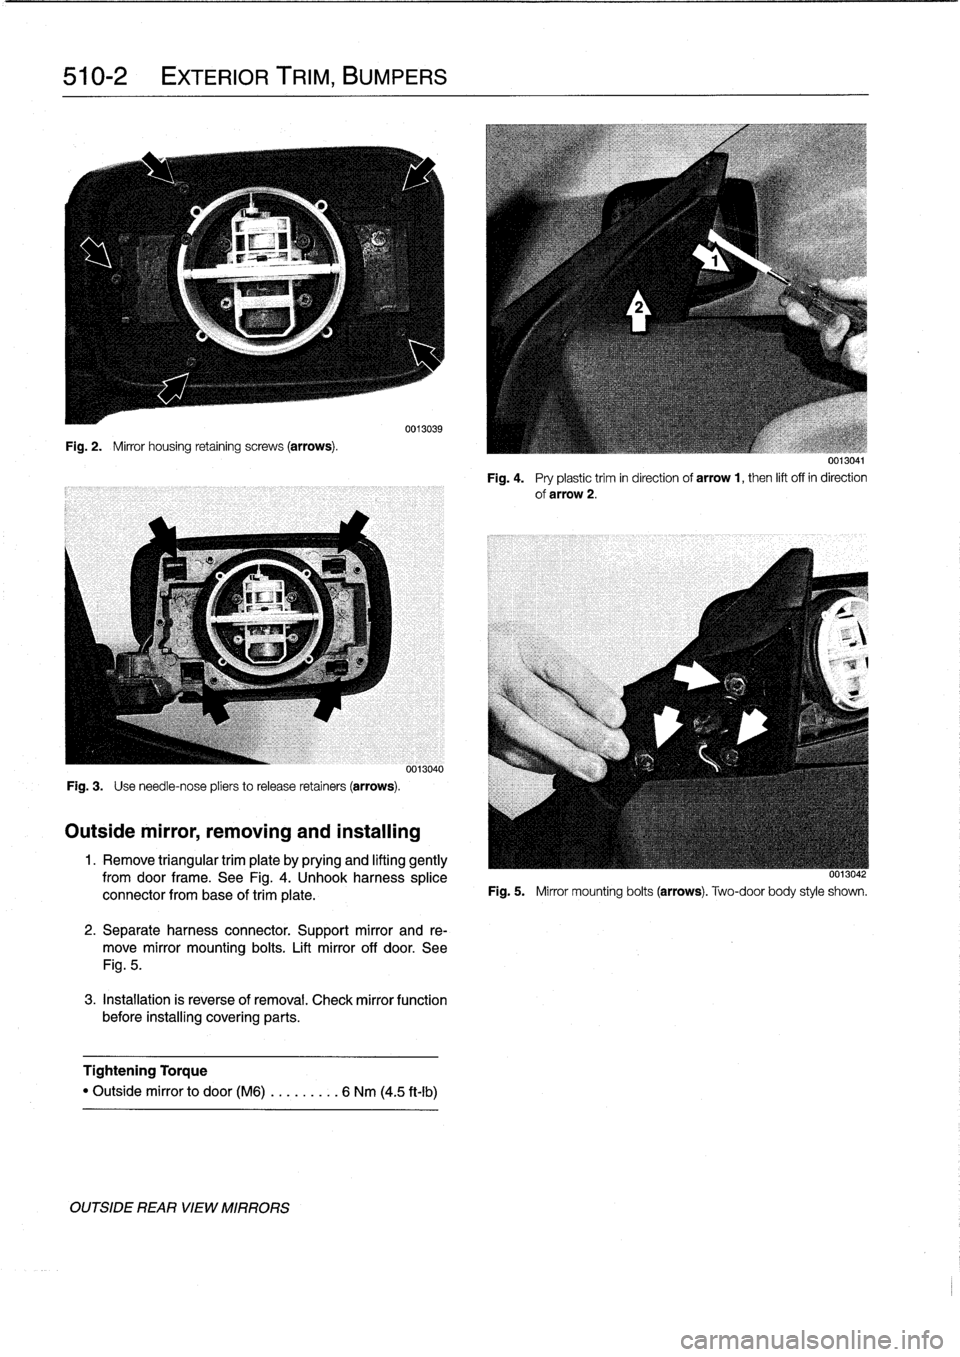 BMW 318i 1995 E36 Workshop Manual 
510-2

	

EXTERIOR
TRIIVI,
BUMPERS

Fig
.
2
.

	

Mirror
housing
retaining
screws
(arrows)
.

Fig
.
3
.

	

Use
need1e-nose
pliers
to
release
retainers
(arrows)
.

Outside
mirror,
removing
and
instal